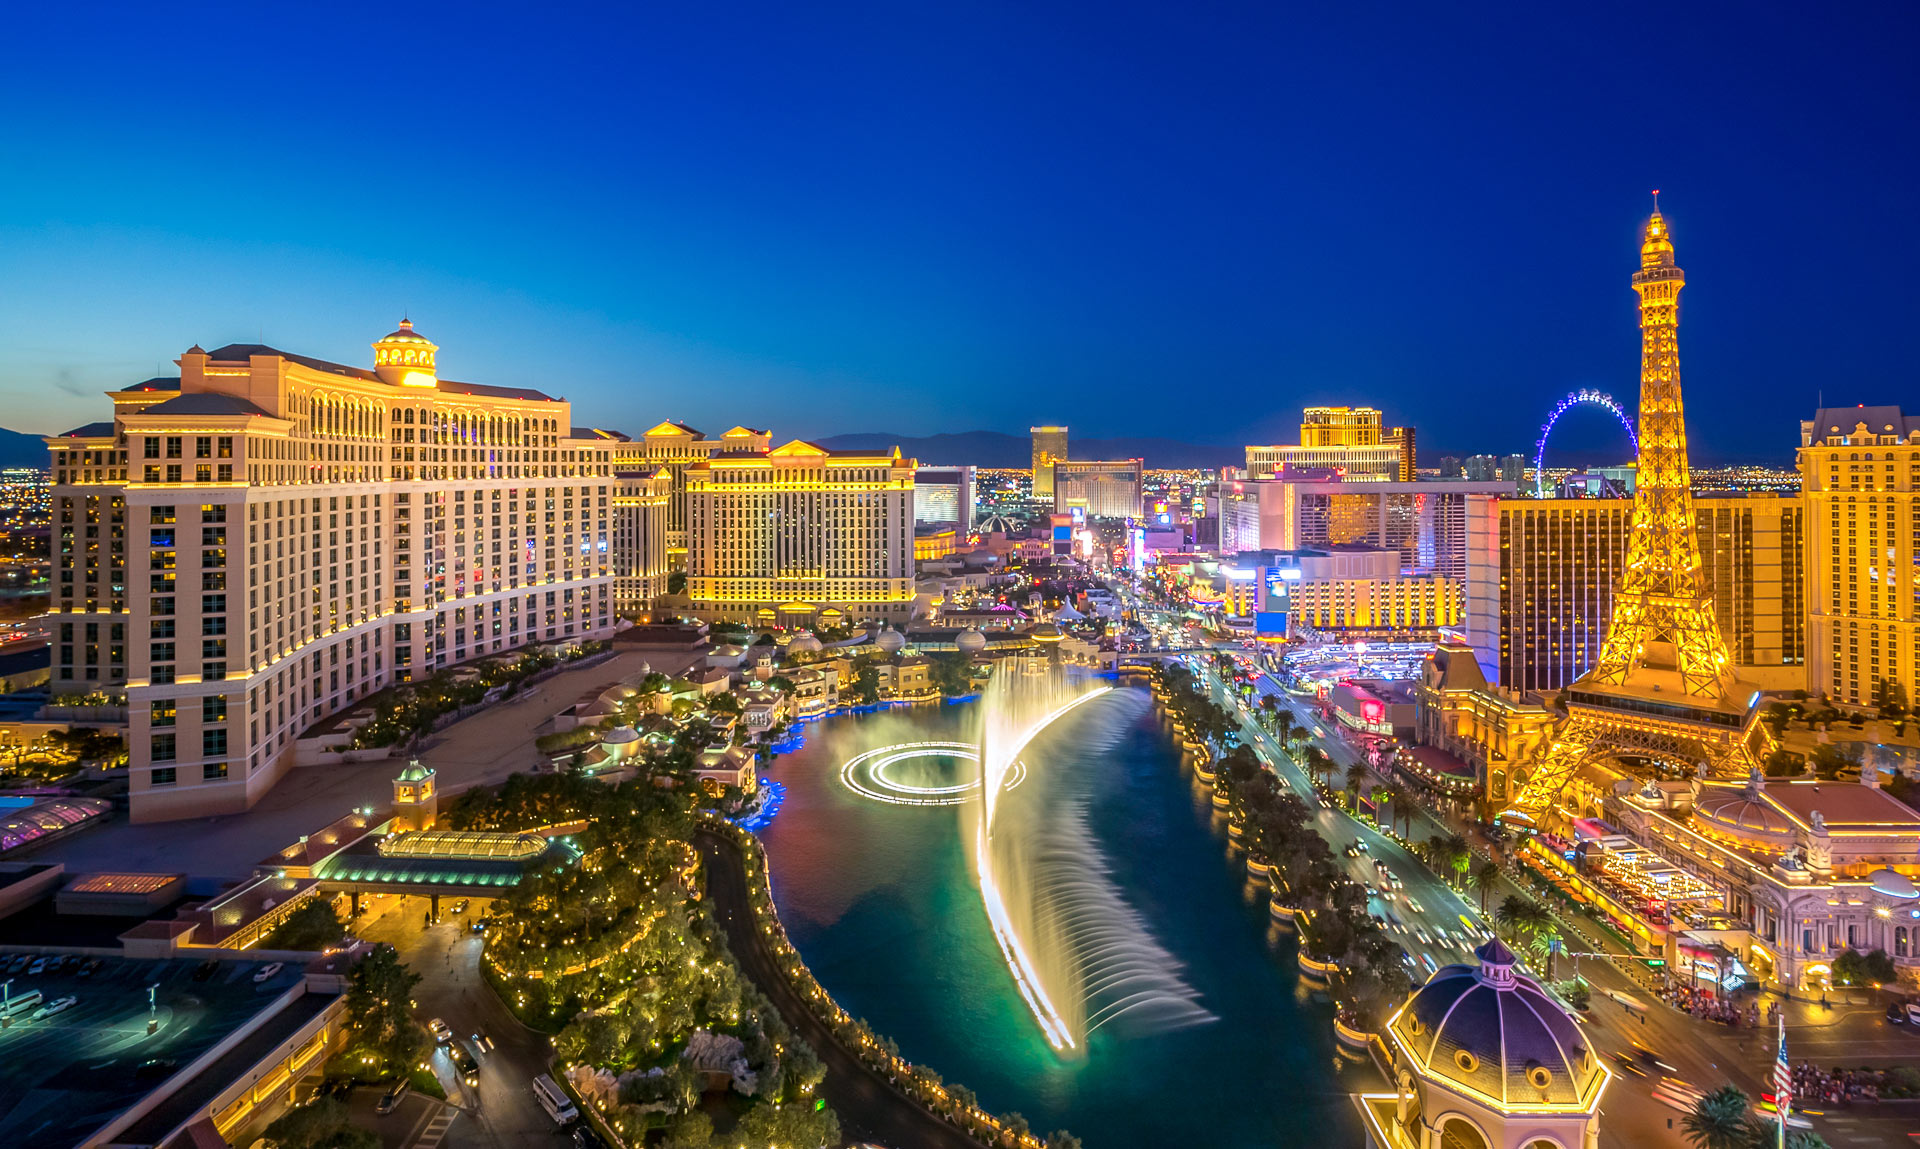 The Best Hotels on the Las Vegas Strip You Can Book with Points